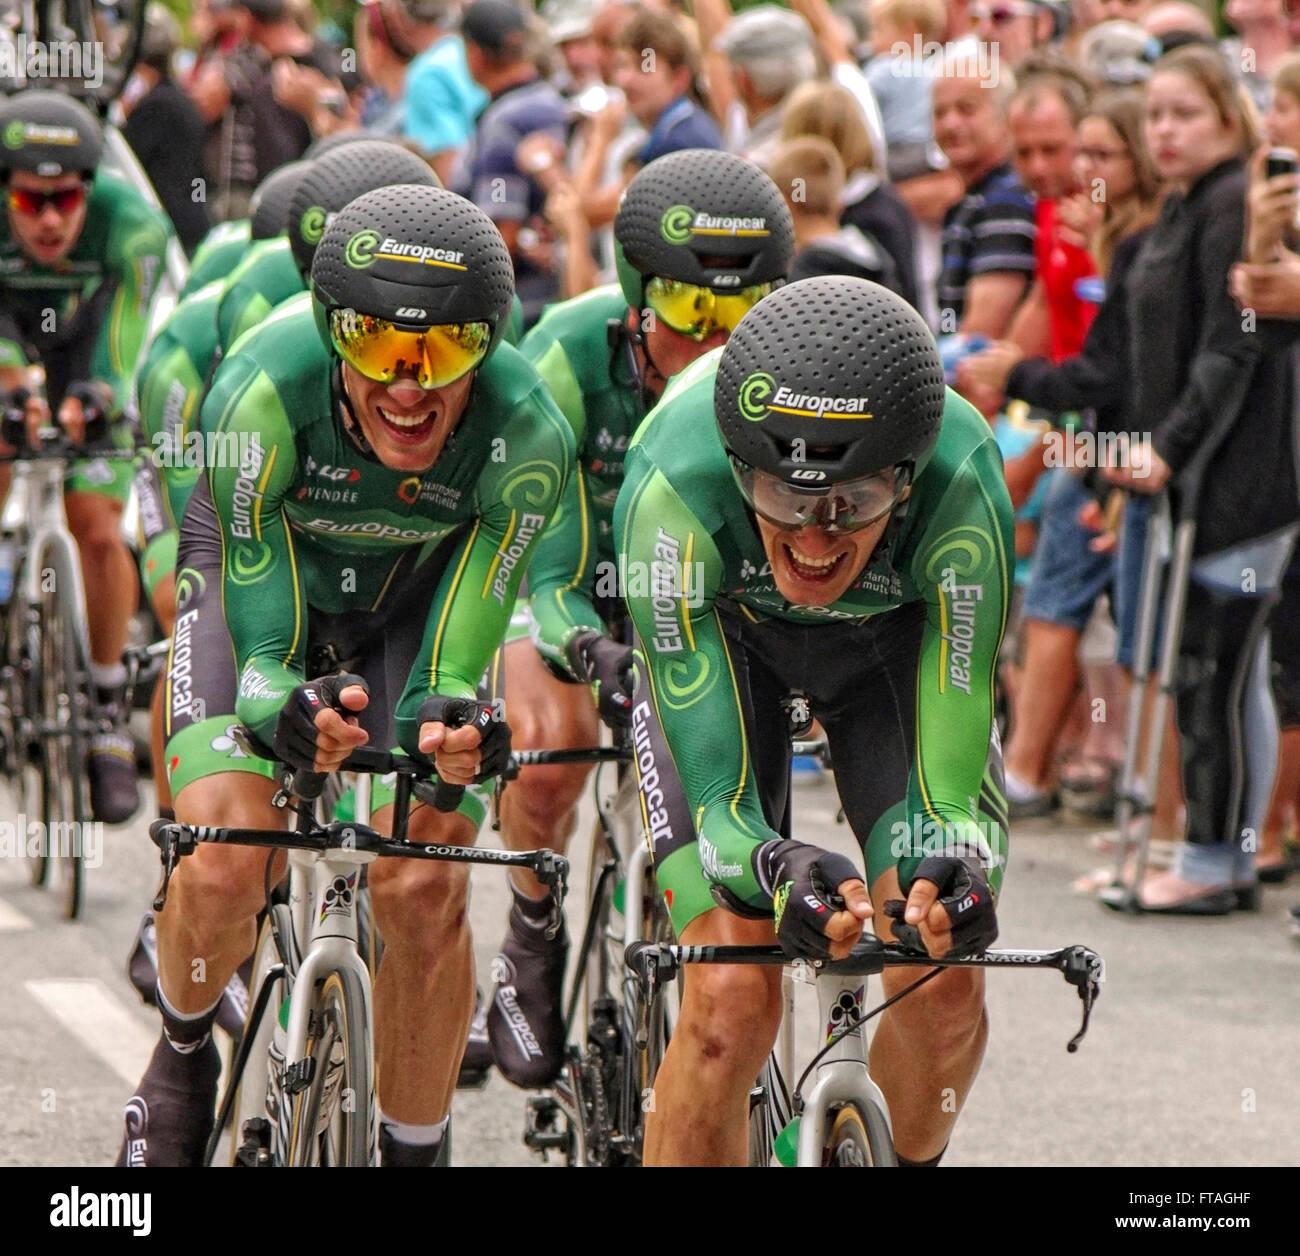 Le Bodan, Plumelec, Brittany France. 12th July, 2015. Team Europcar competing at the Tour de France 2015 Stage 9 Team Time Trial Stock Photo